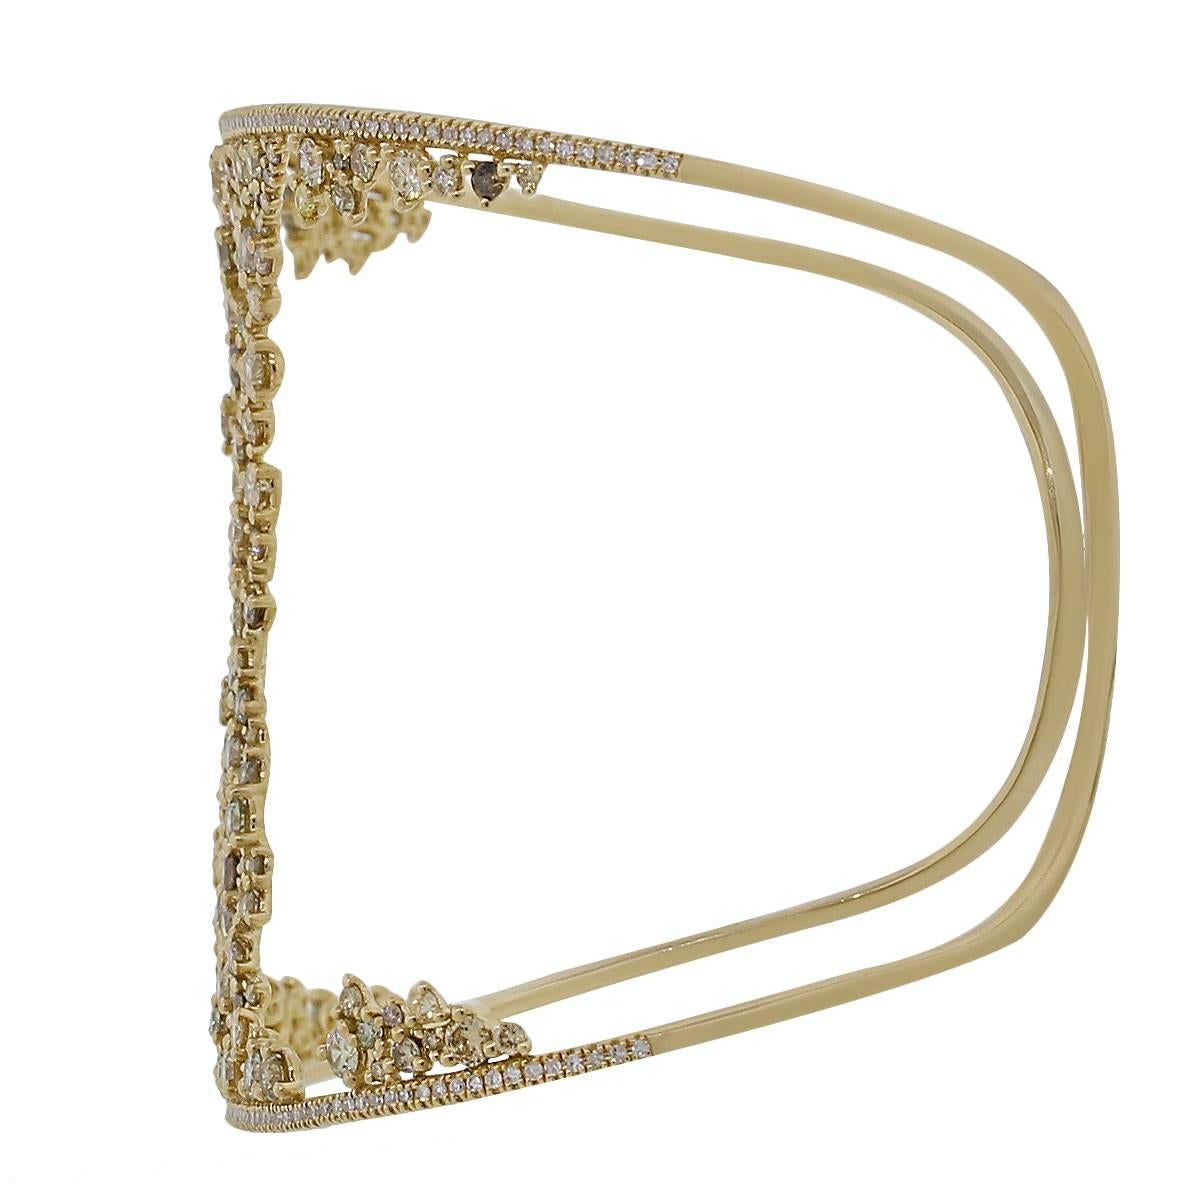 Style: Diamond bangle bracelet
Material: 18k Yellow Gold
Diamond Details: Approximately 4.7ctw of warm champagne diamonds and white diamonds. White diamonds are G/H in color and VS in clarity
Clasp: This bracelet features a spring ring safety